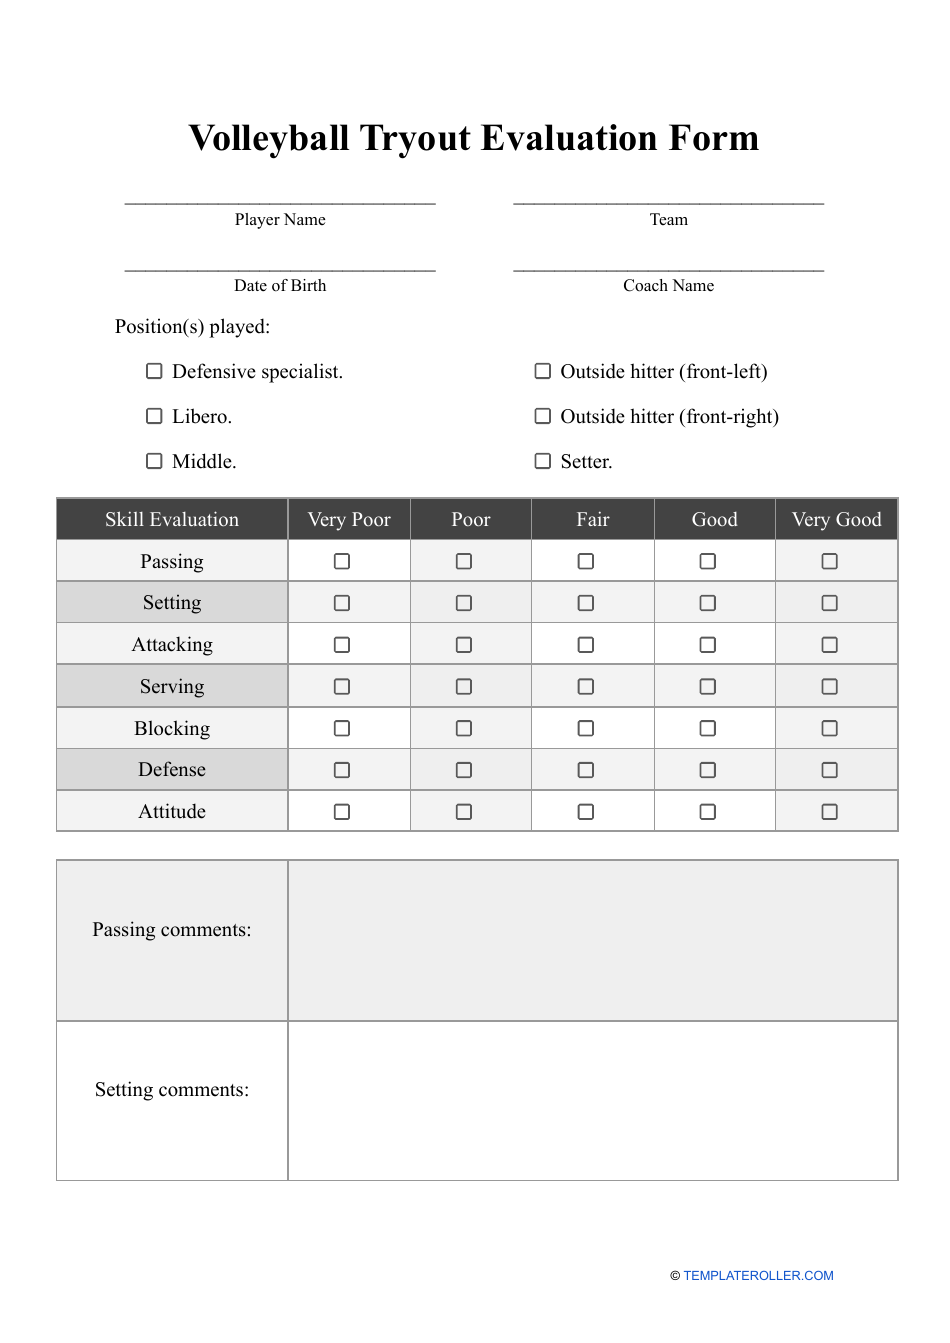 Volleyball Tryout Evaluation Form, Page 1